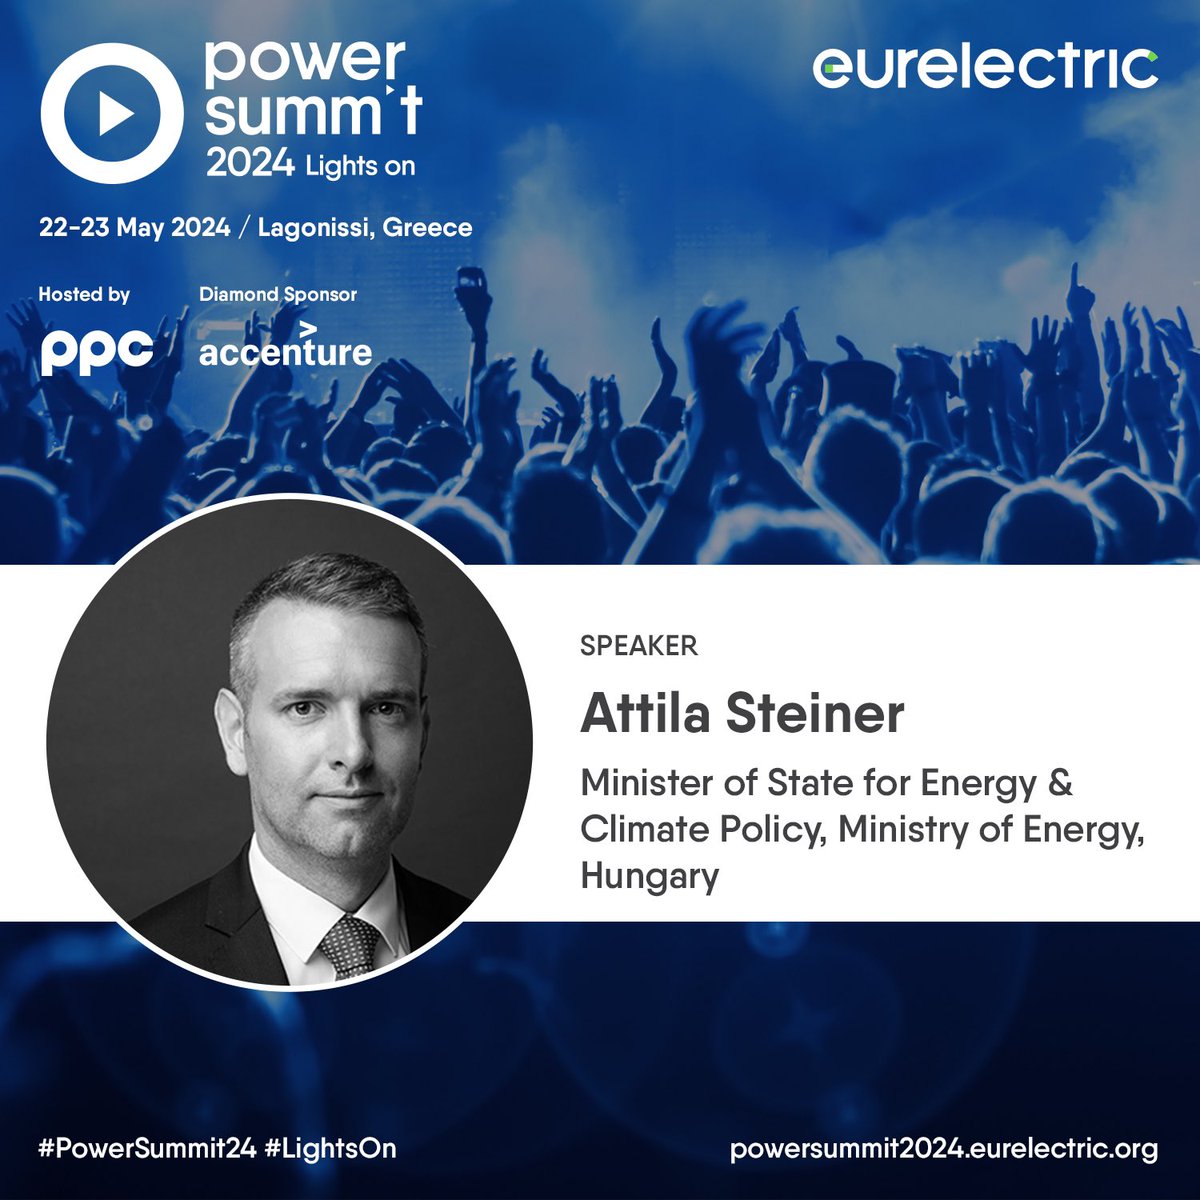 🎙️🔋 I am delighted to be among the speakers at the @Eurelectric Power Summit on 23 May 2024 in Lagonissi, Greece. #eurelectric #Accenture #comingsoon